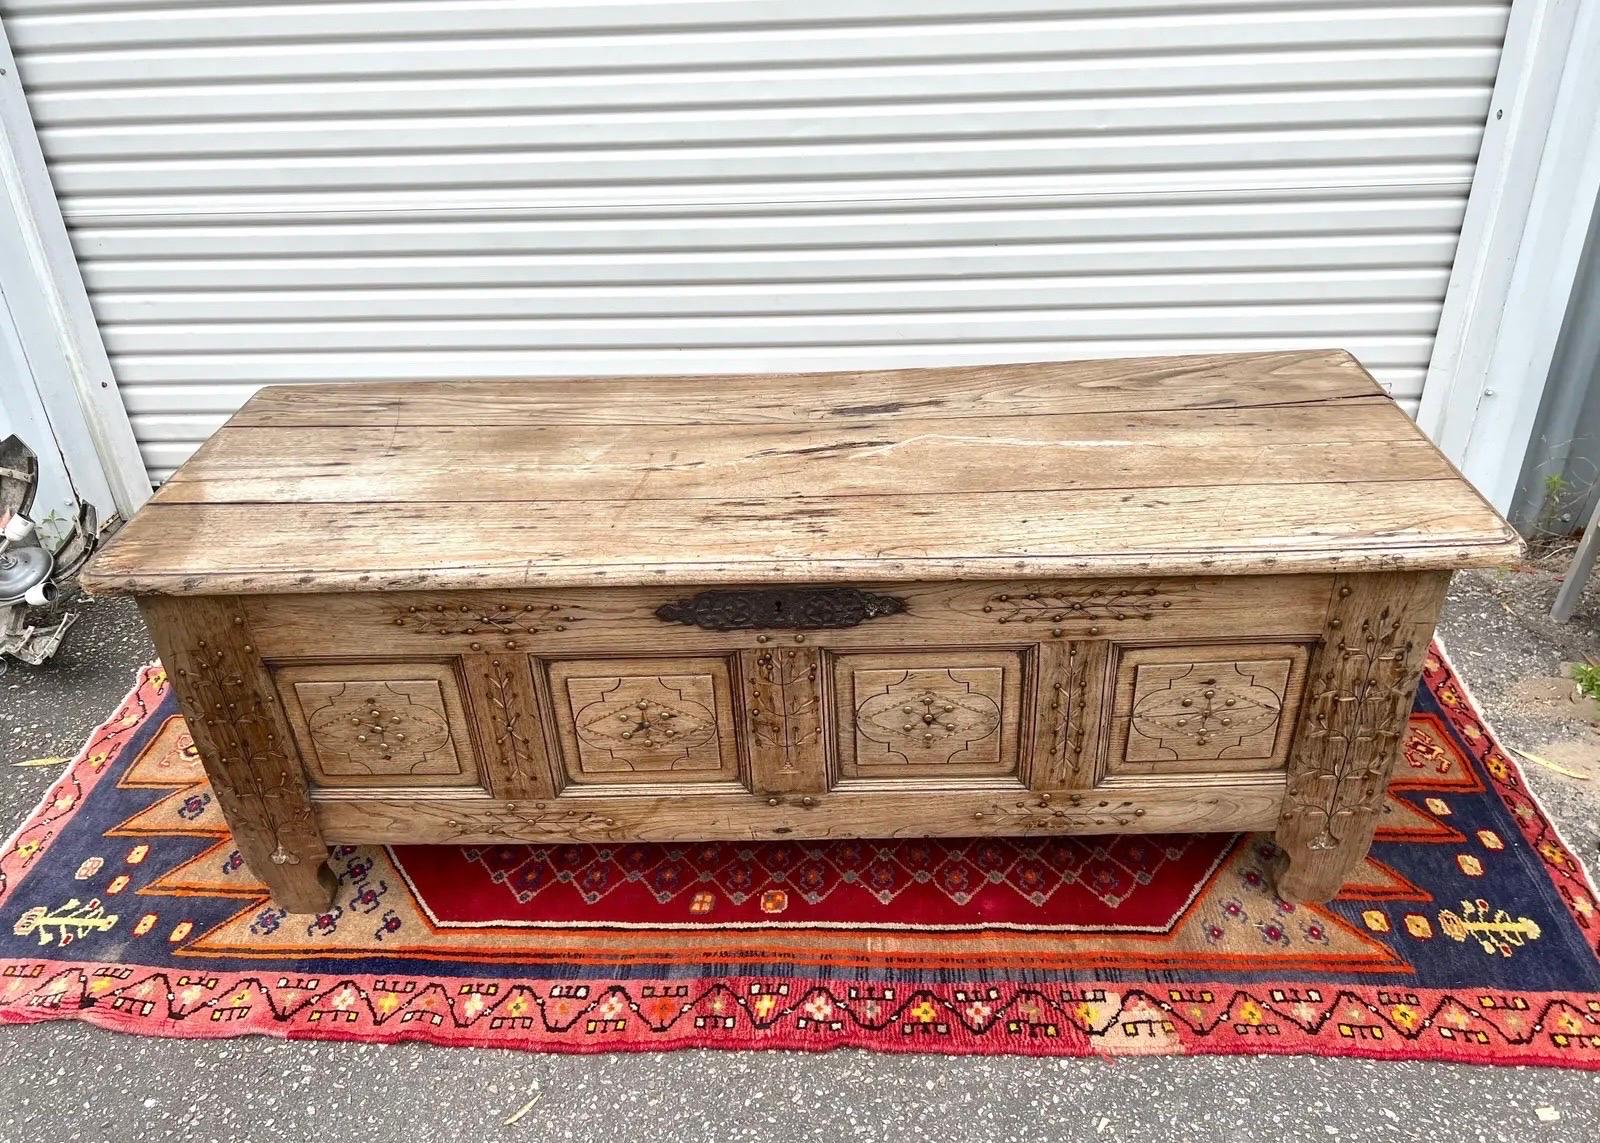 circa 1800s - Could be earlier either from a church or otherwise a sword coffer. Lovely dry condition and color. Would make a lovely bench/chest at the end of the bed or entryway. Very sturdy. All original hardware. Hand carved.